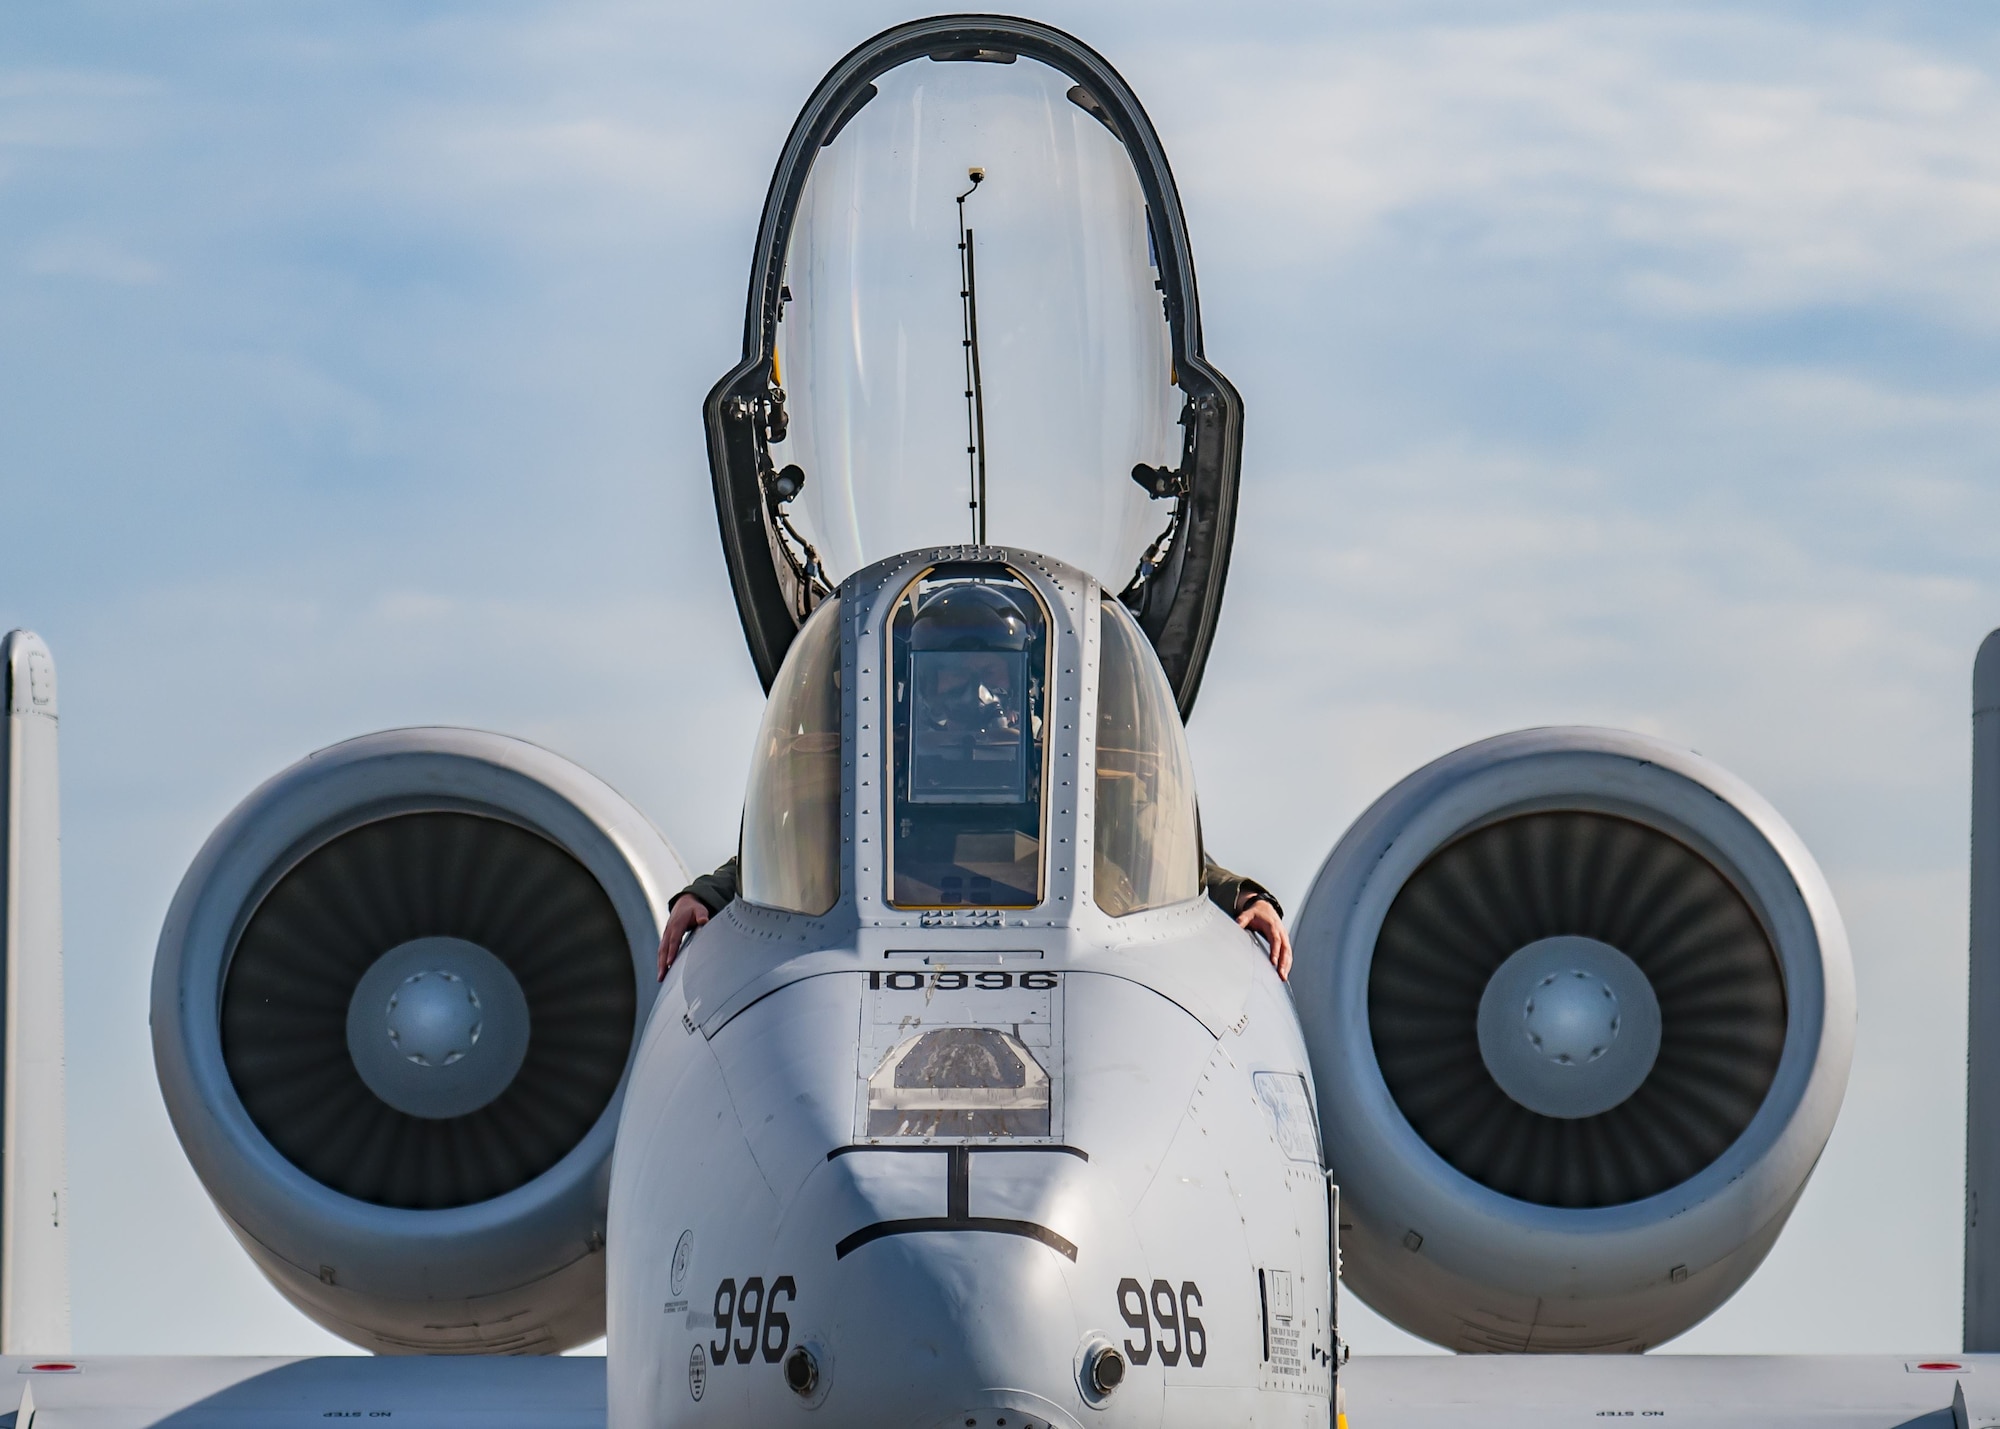 Capt. Jason Davenport, A-10 Thunderbolt II pilot from the 107th Fighter Squadron sits inside the flightdeck during a preflight inspection, Feb. 2, 2018 at Patrick Air Force Base, Fla